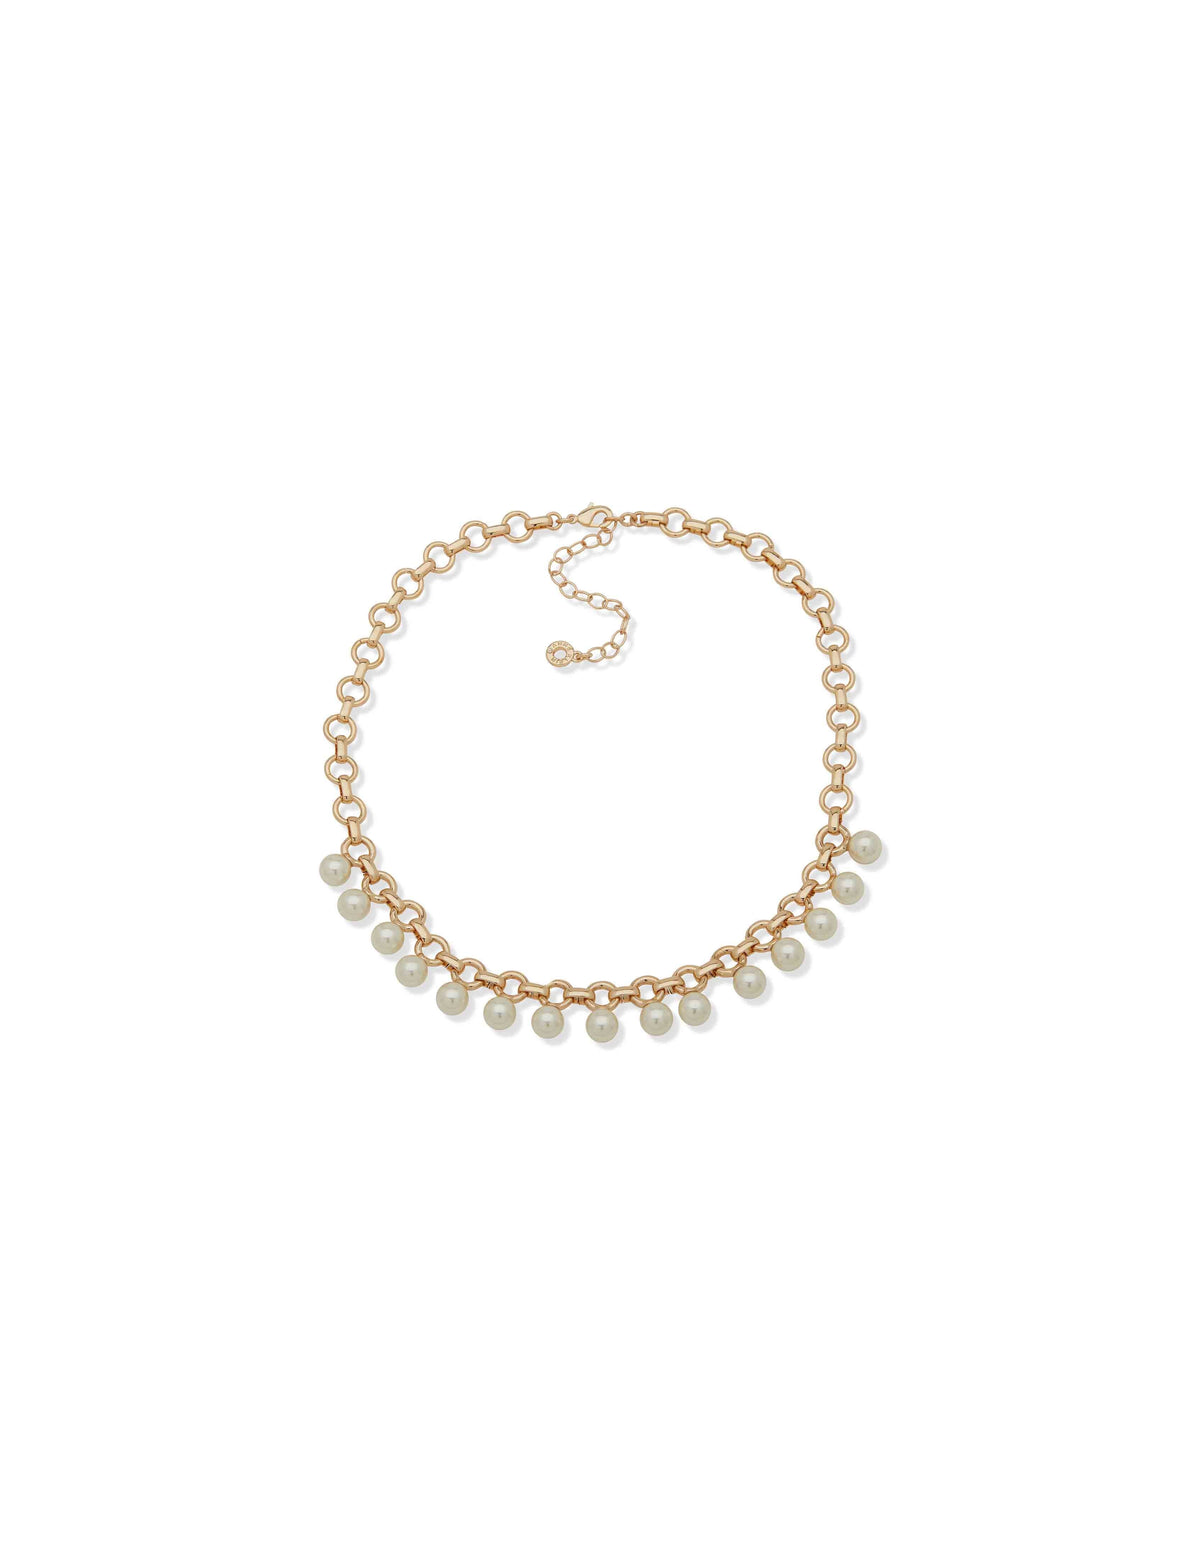 Anne Klein Gold Tone Faux Pearl Rolo Chain Necklace